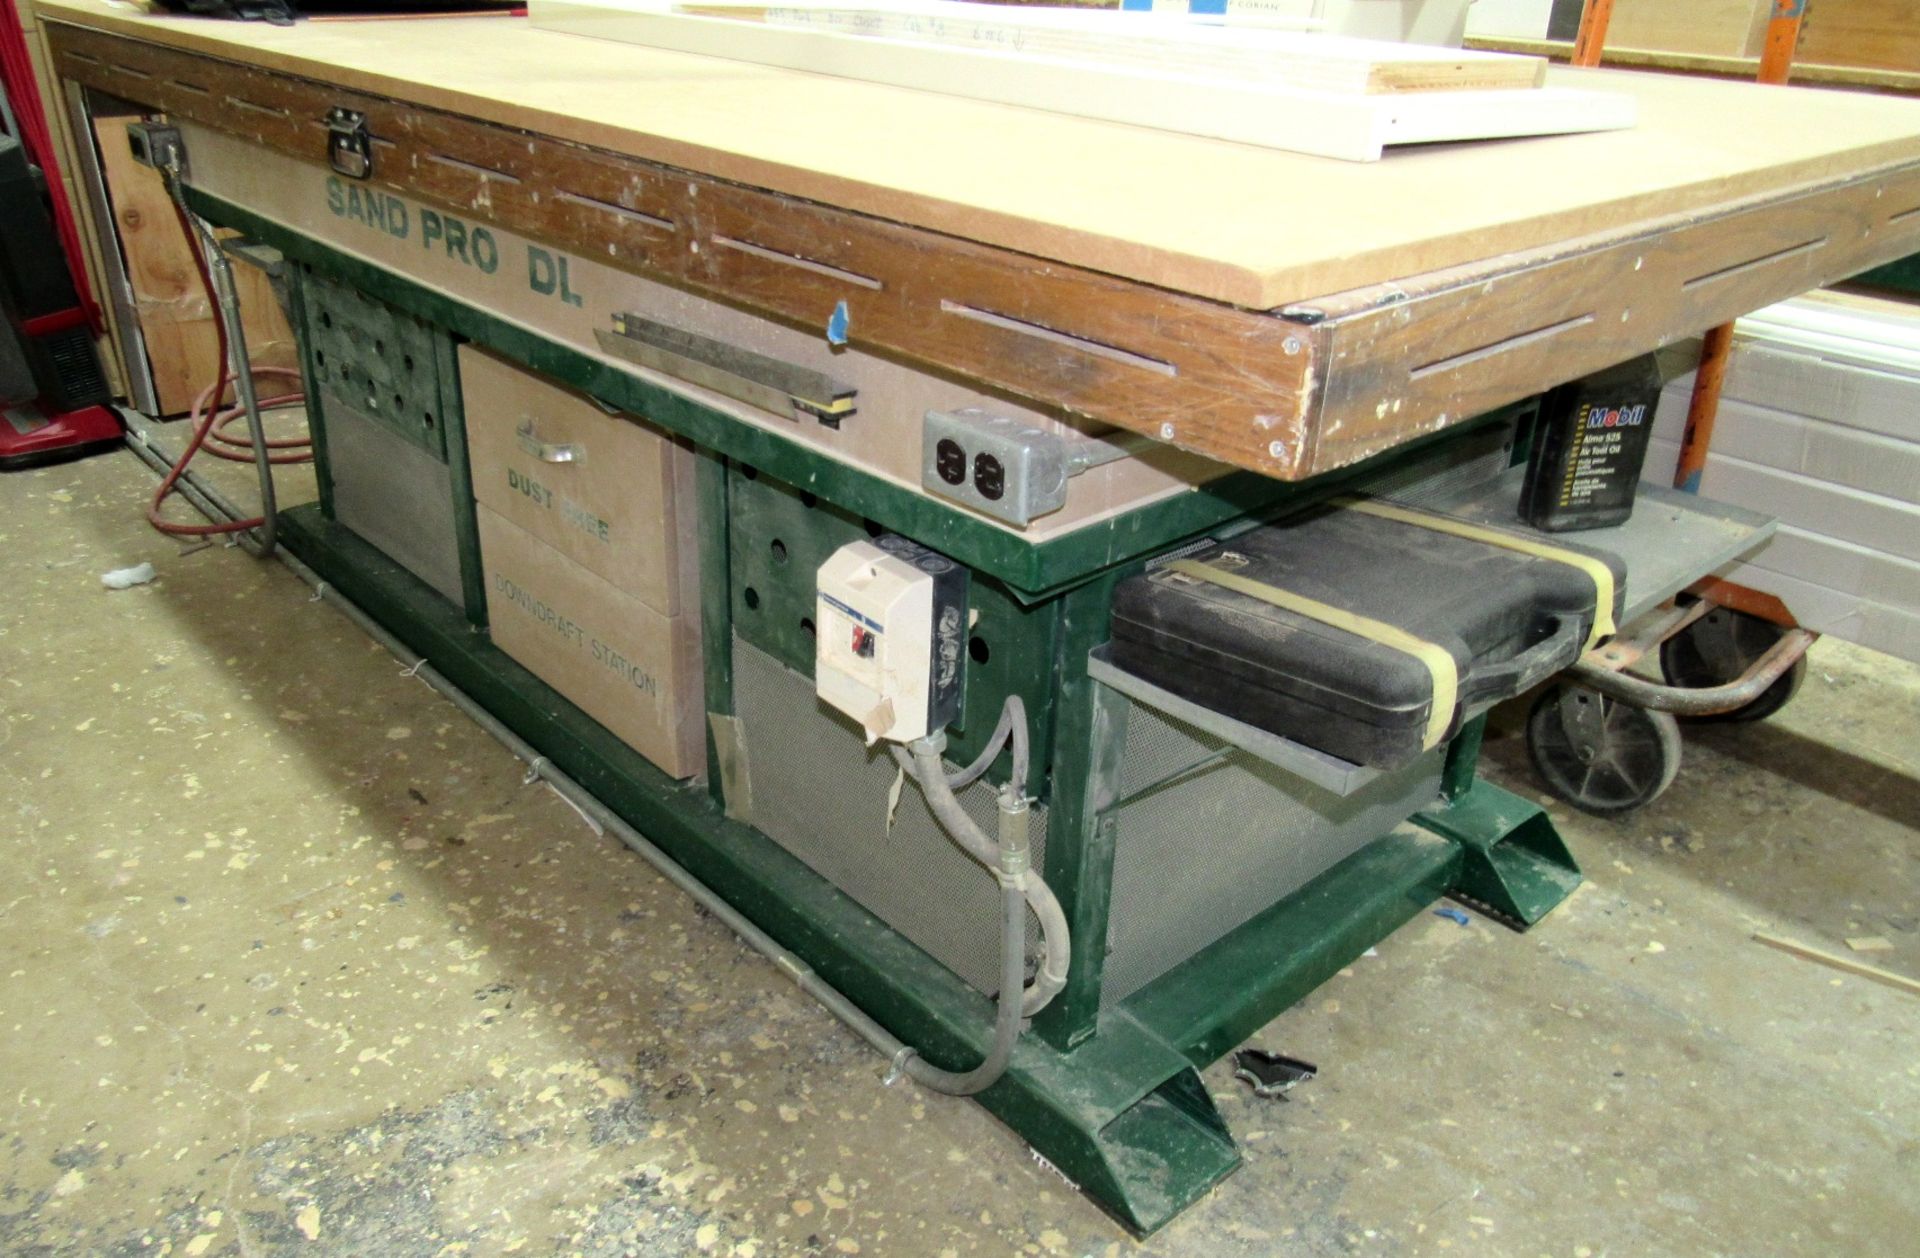 Sand Pro Mod.DL9648 Downdraft Sanding Station - New 2008, 96" x 48" Table Size, 36" Table Height, (